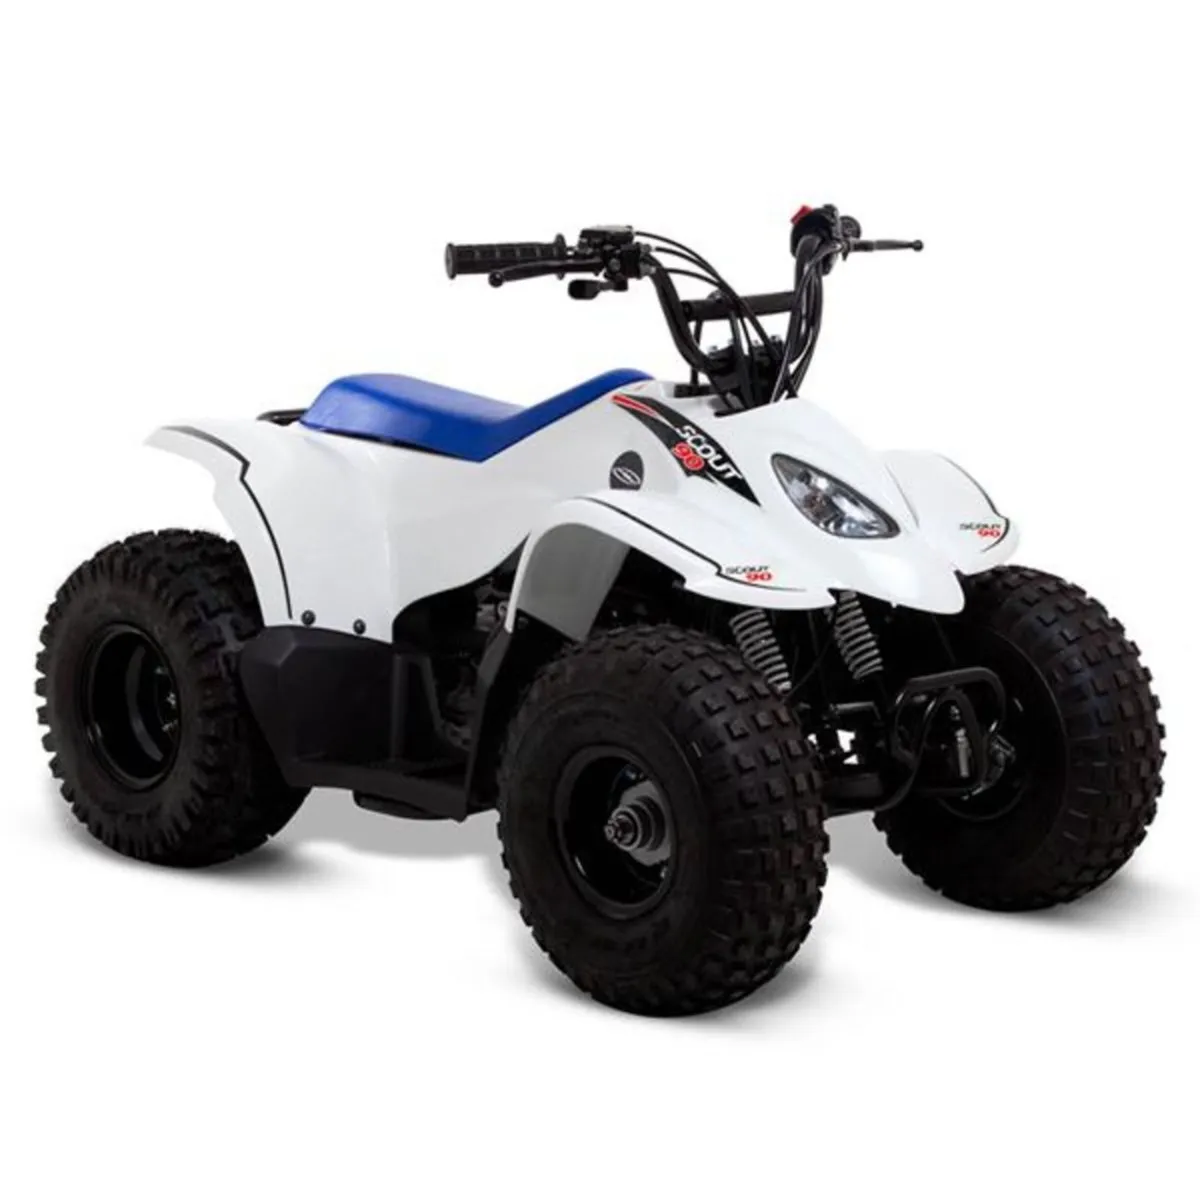 SMC Scout 90 cc kids quad 2 year WARRANTY/DELIVERY - Image 1